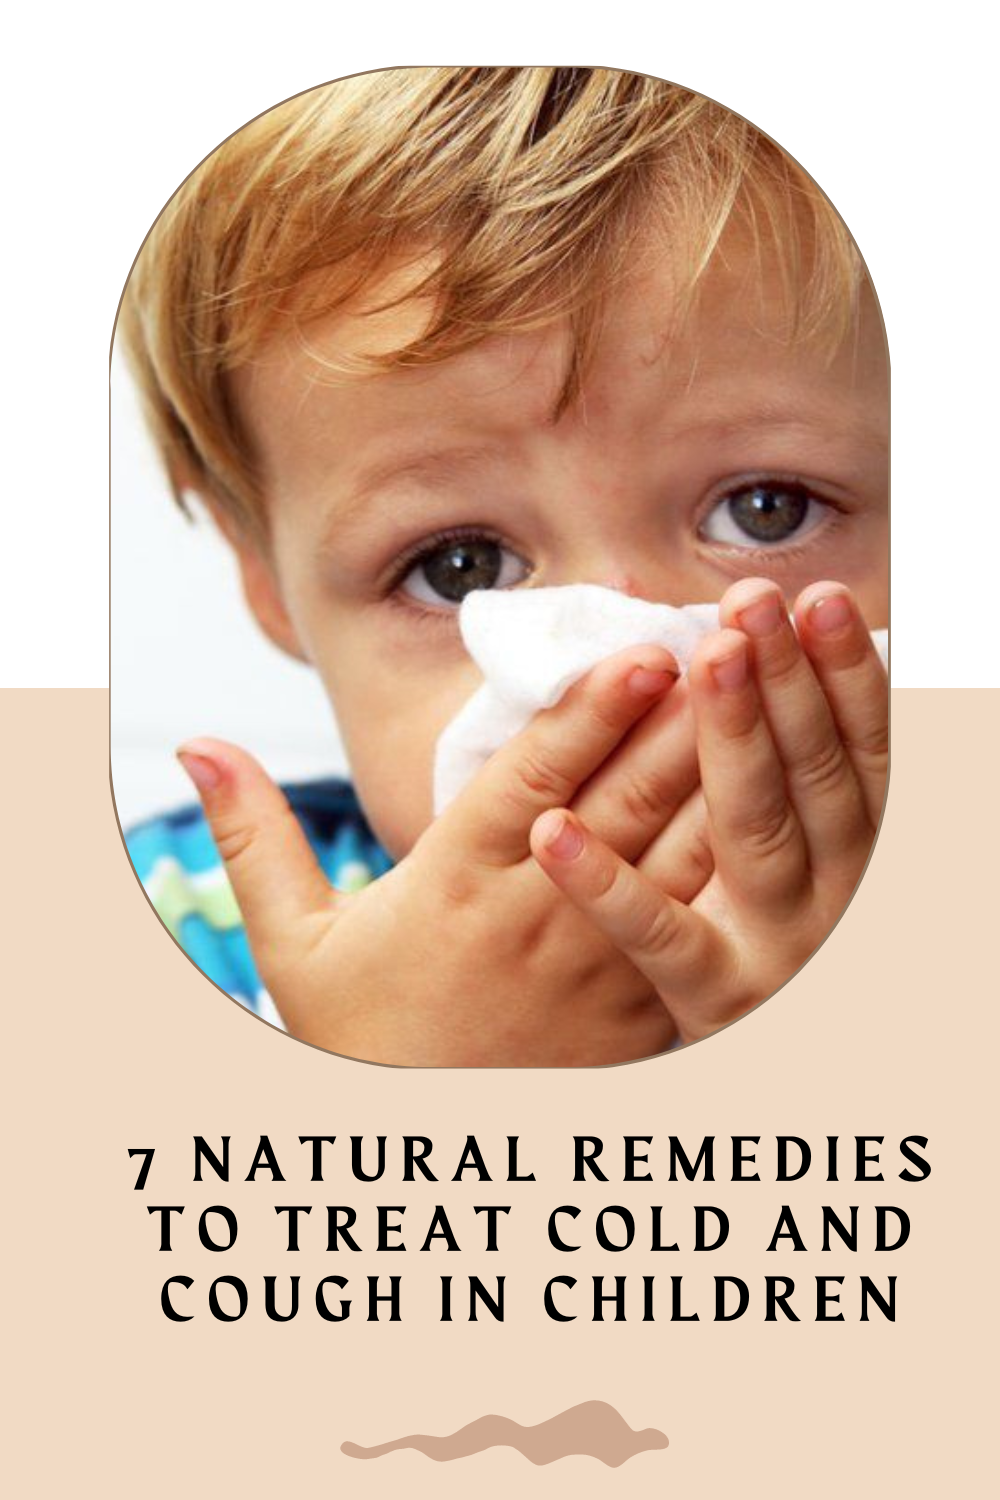 7 Natural Remedies to Treat Cold and Cough in Children